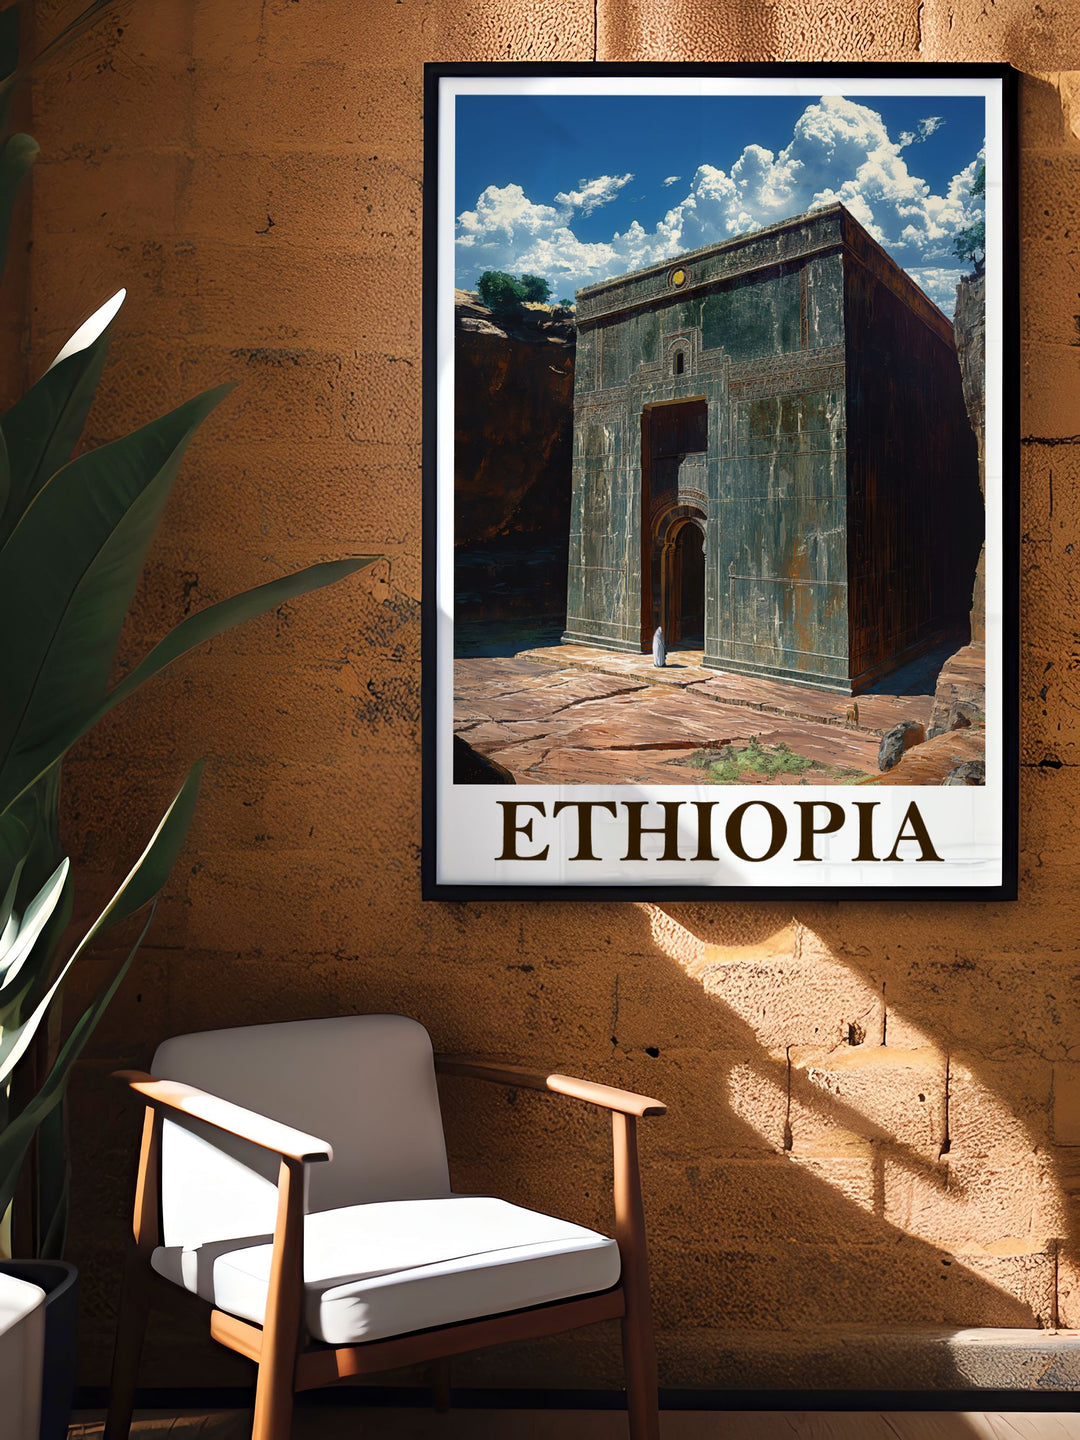 Beautiful Ethiopia Photo of Lalibela Rock Hewn Churches perfect for lovers of travel and history bringing the awe inspiring beauty and intricate details of these ancient structures into your home